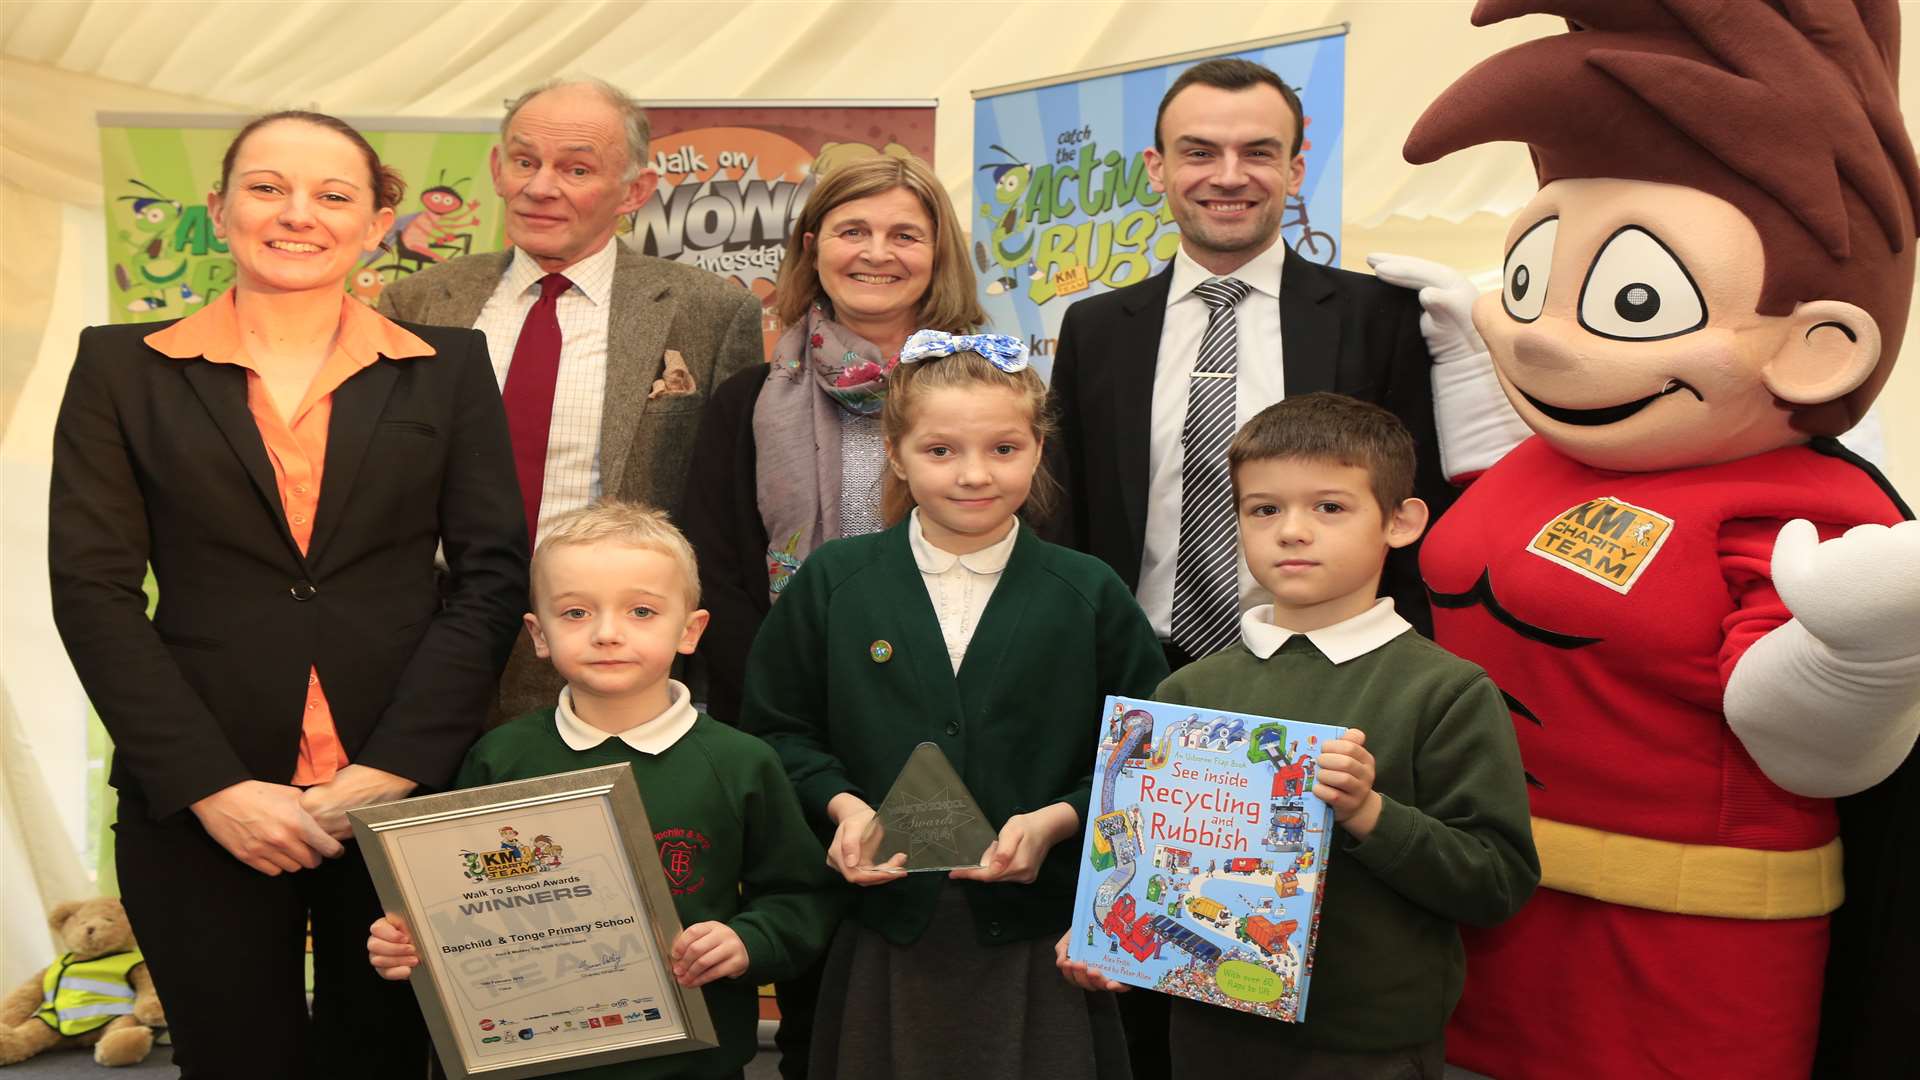 Kent wide Top WOW School winners Bapchild and Tonge Primary School at the KM Walk to School Awards with mascot Wowzer and supporters from Three R's Teacher Recruitment, Kent County Council and Countrystyle Recycling at Commissioner's House, Historic Dockyard, Chatham.